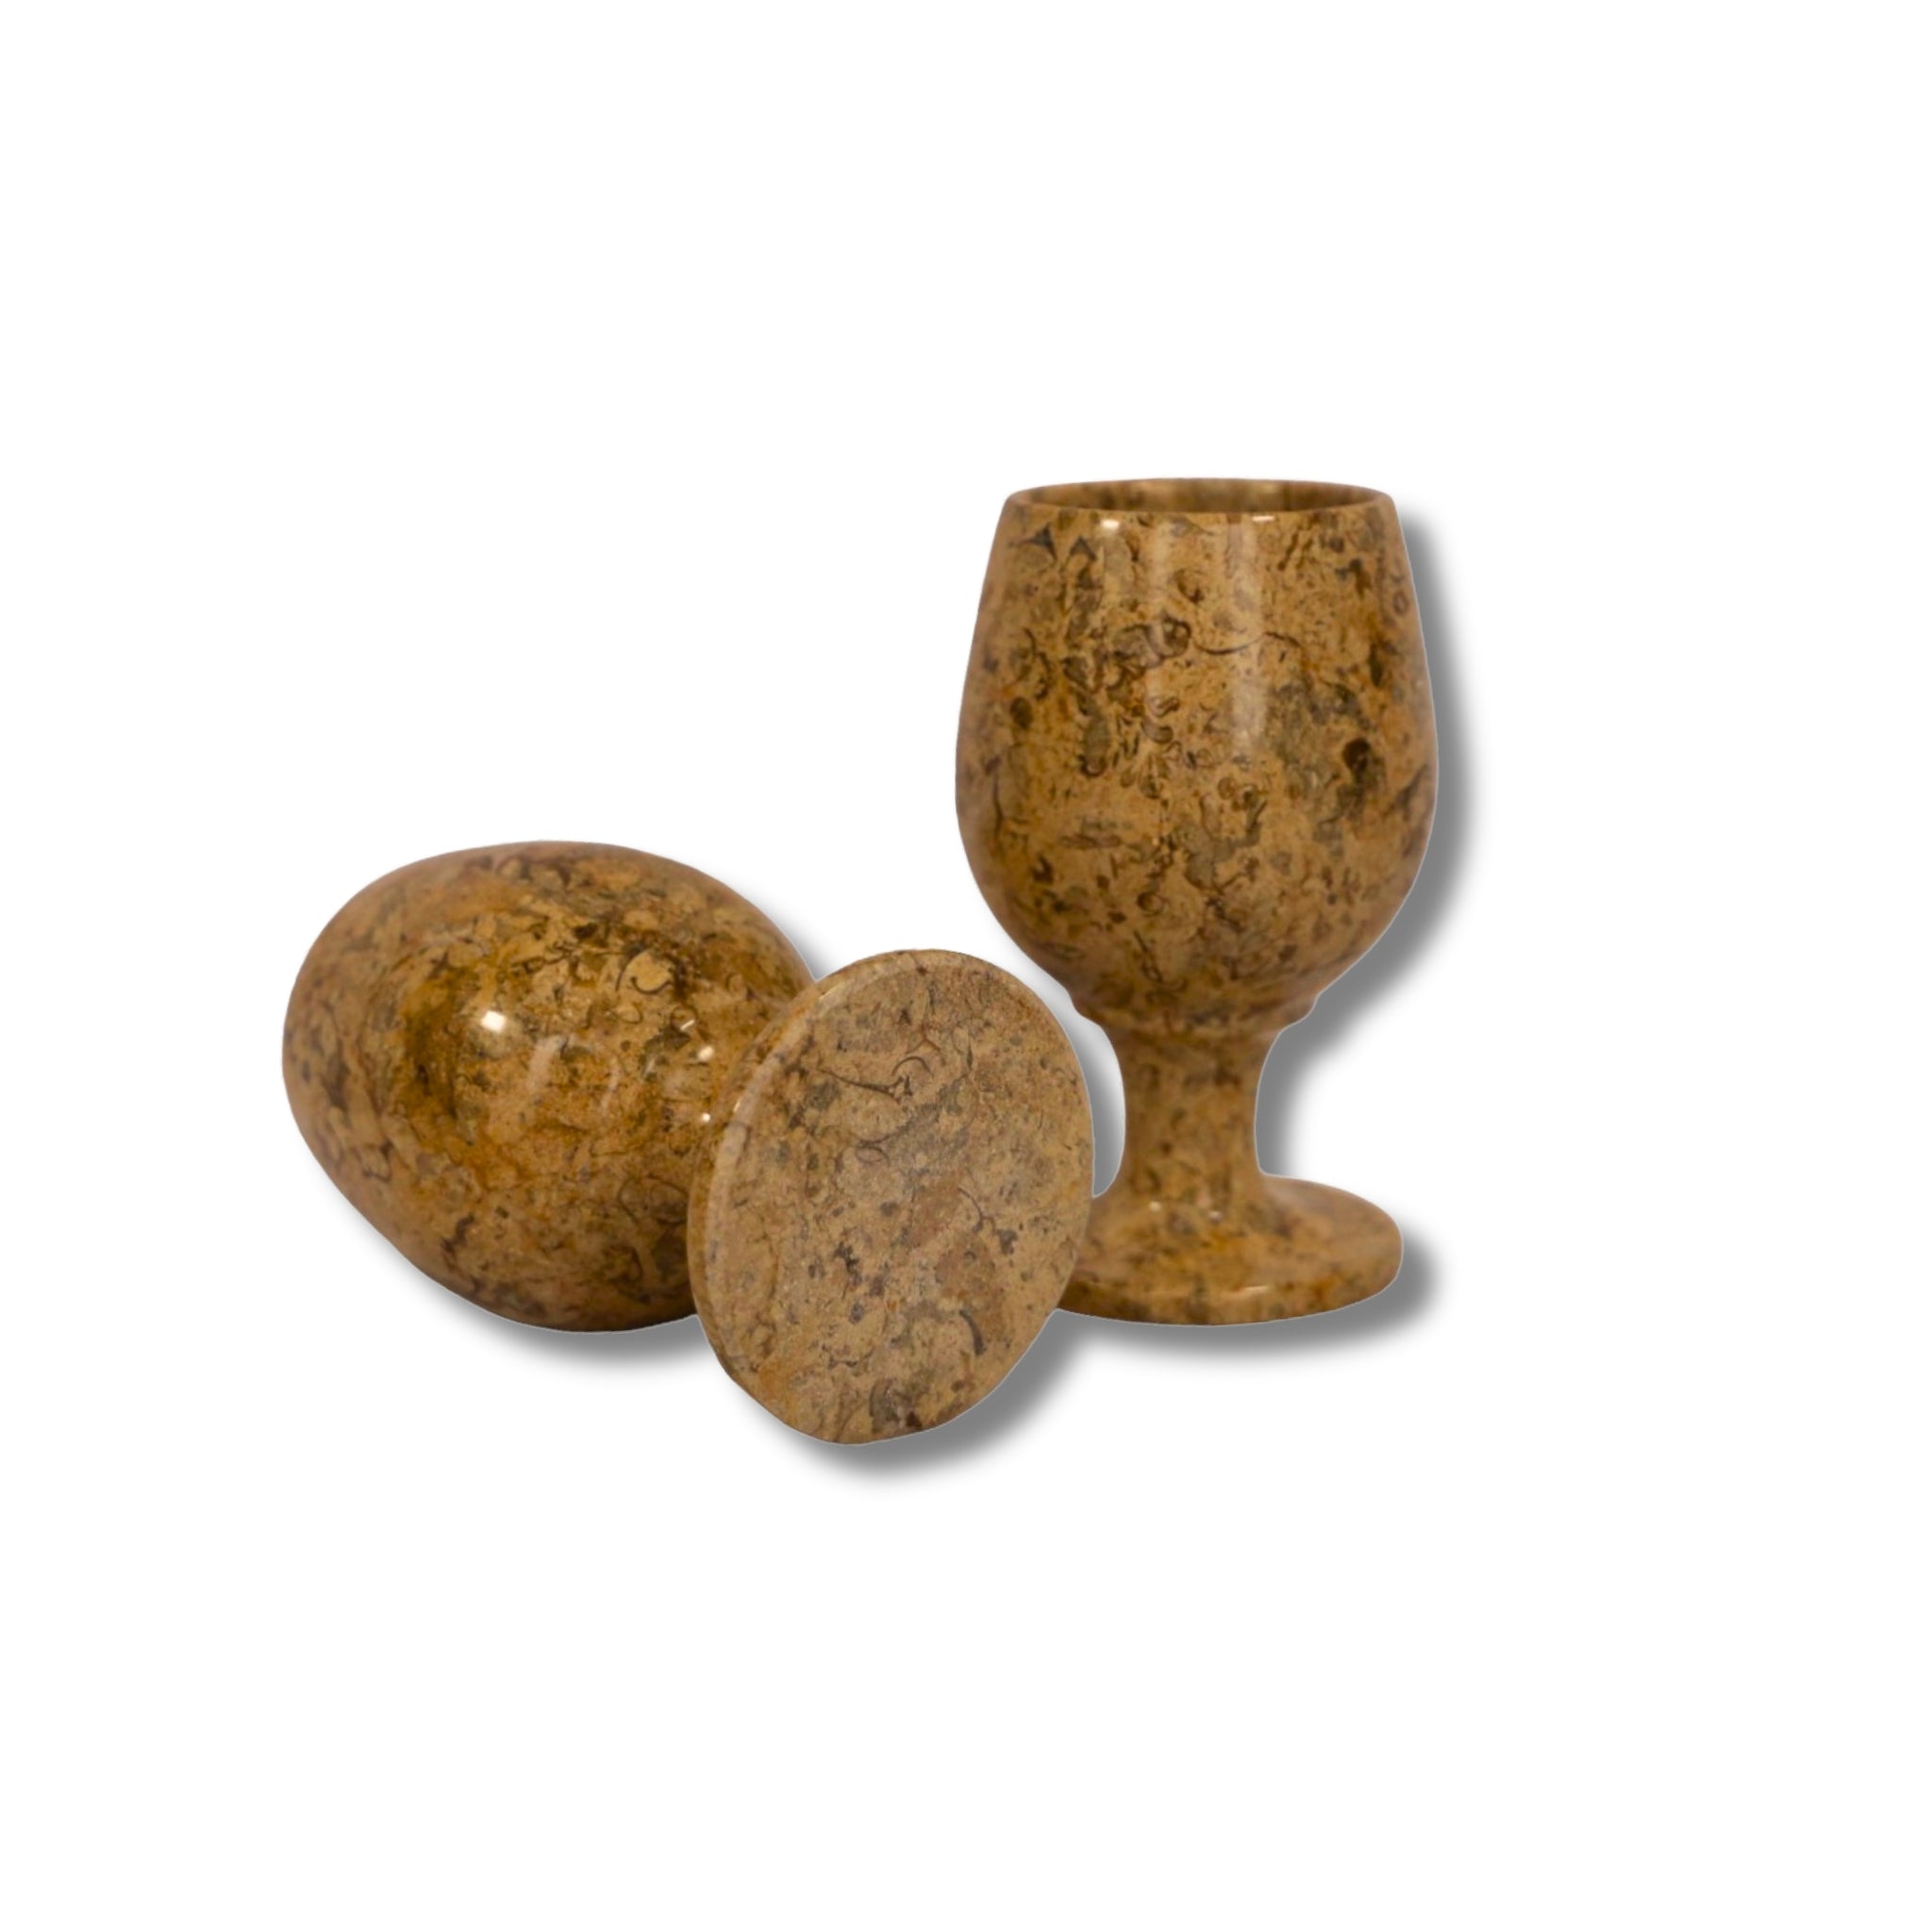 Elegant Fossil Stone Goblet Set of 2 - Luxurious Home Accent